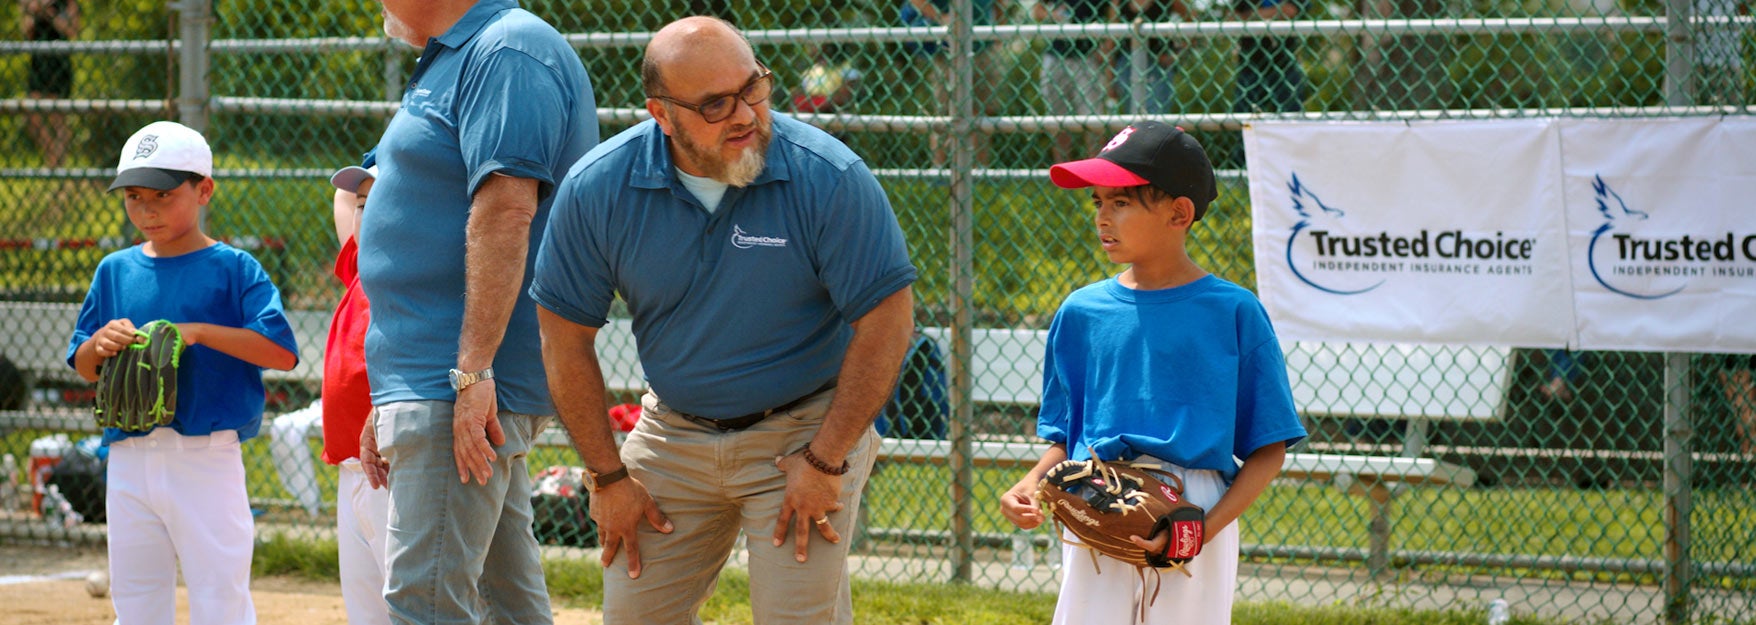 Young boy baseball player with his coach getting instructions. Get homeowner's insurance.